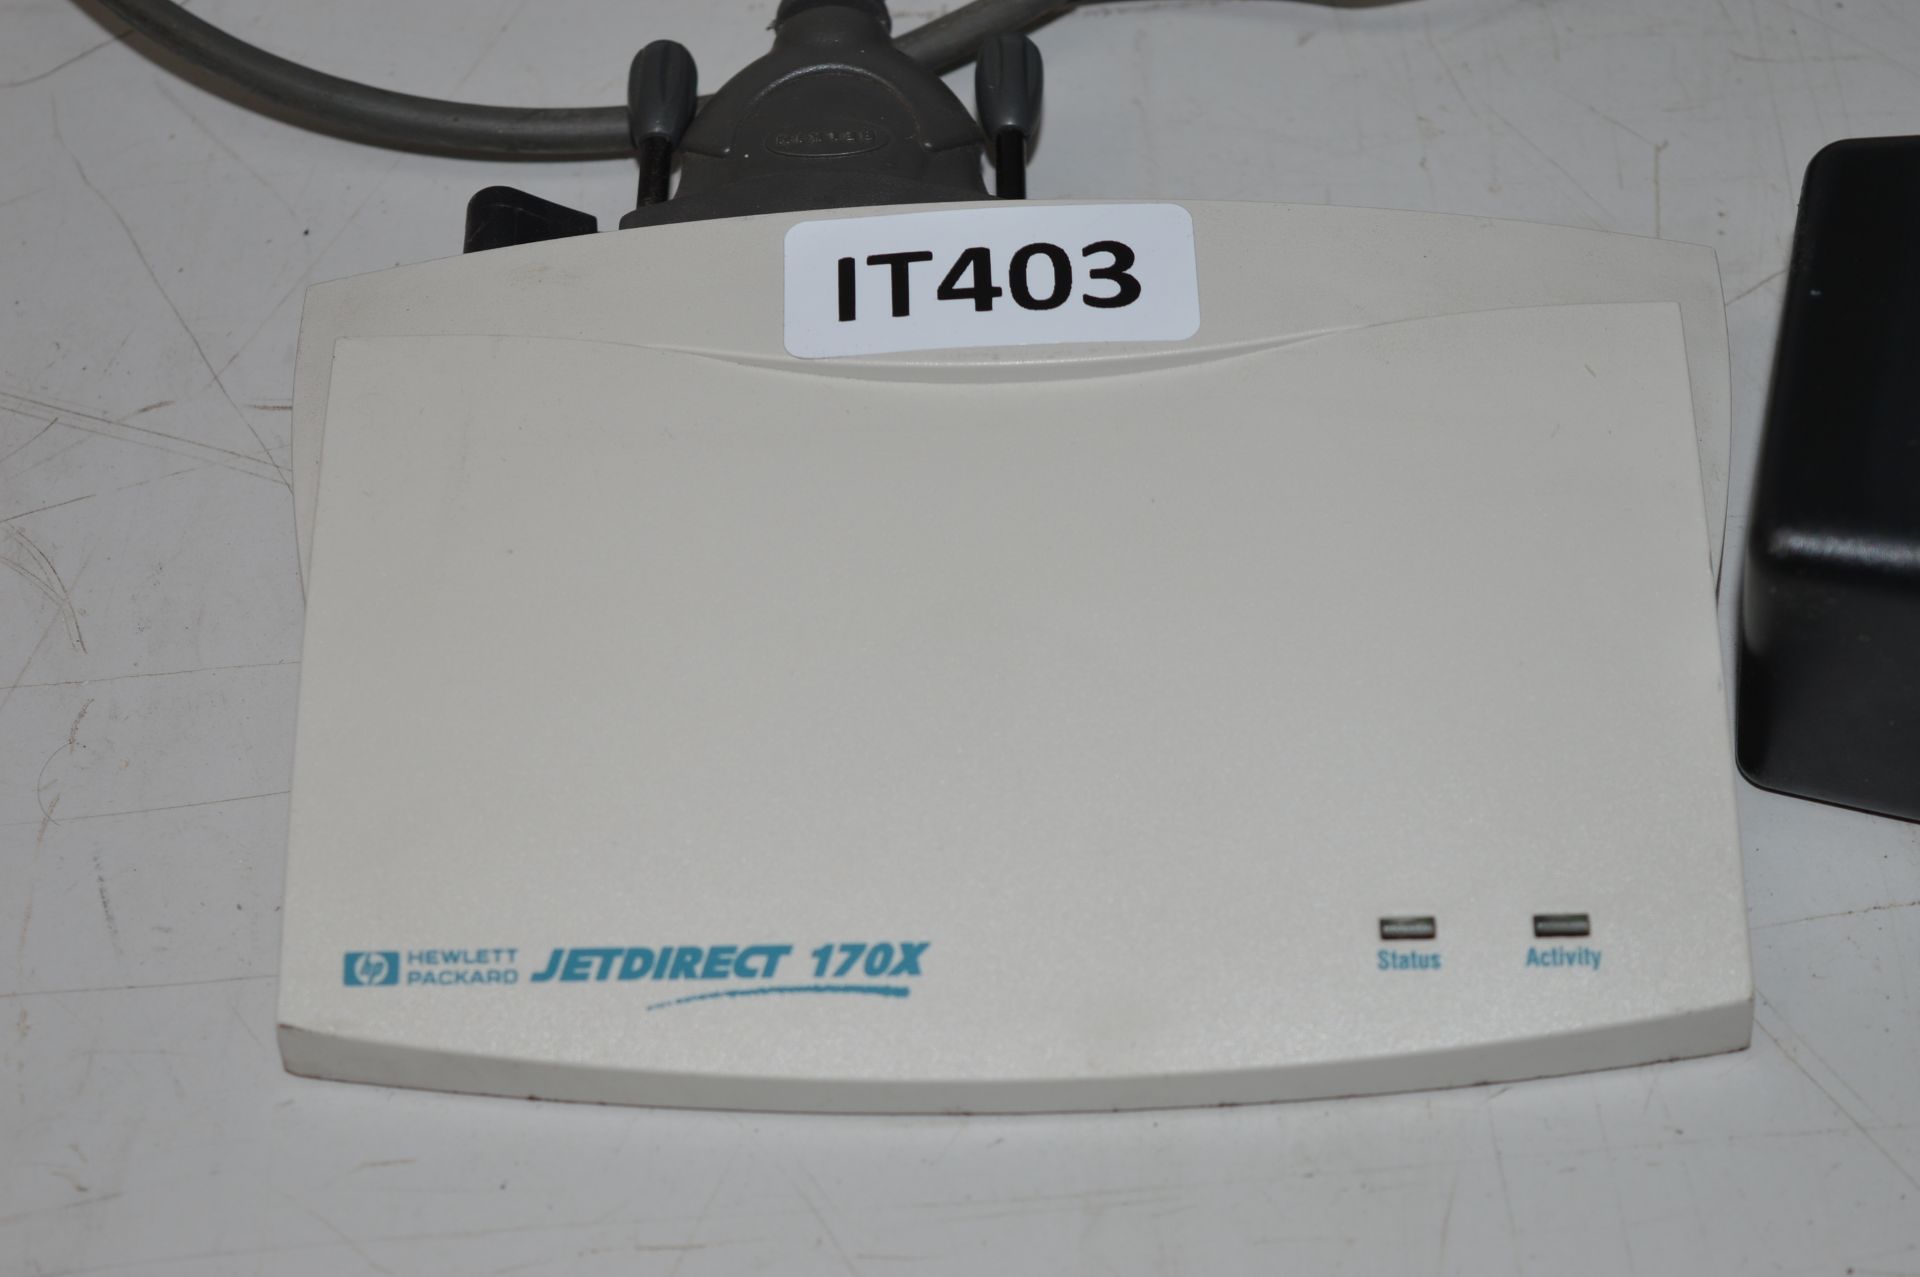 1 x HP JetDirect 170x External Print Server (J3258B) - Includes Cables - Ref IT403 - CL280 - - Image 2 of 4